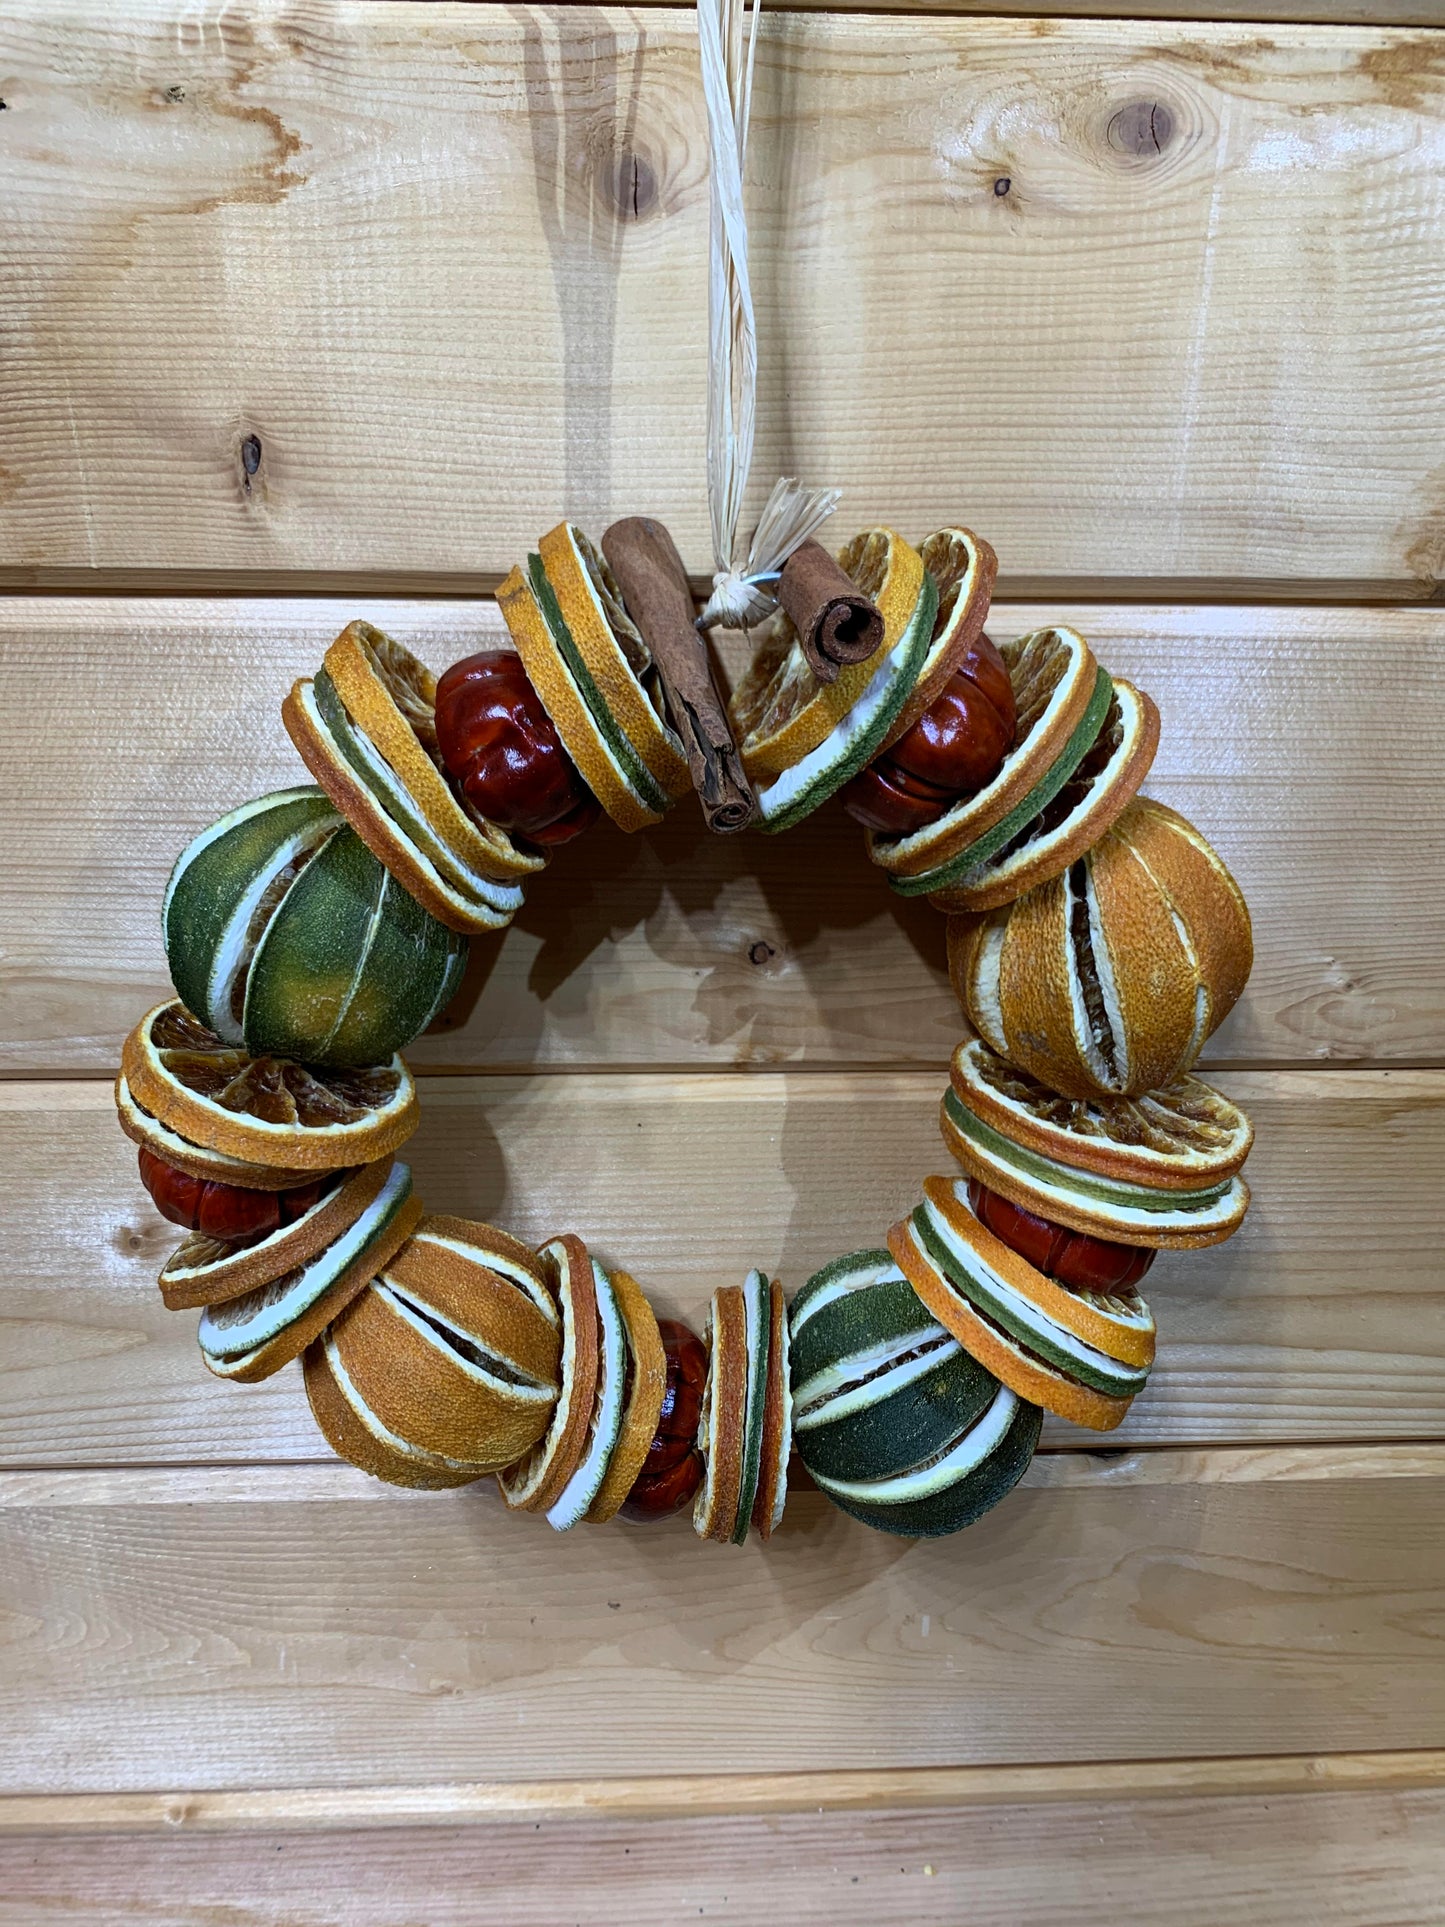 A gorgeous Christmas circle shaped wreath for your door made up of dried whole and sliced oranges and limes, small red peppers and cinnamon sticks on a wire base.